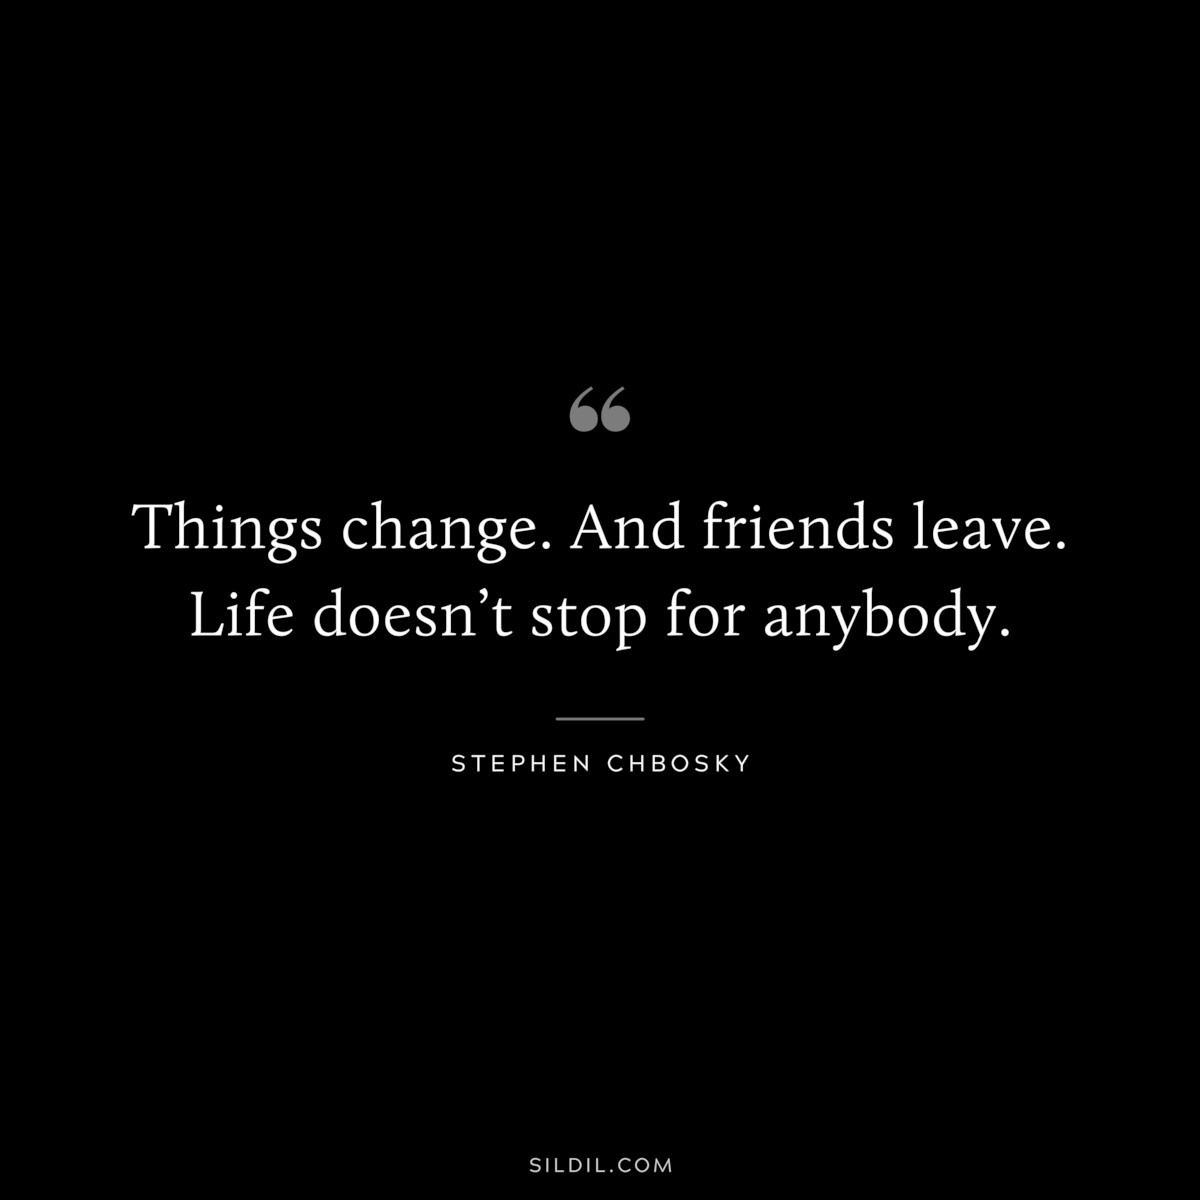 Things change. And friends leave. Life doesn’t stop for anybody. ― Stephen Chbosky